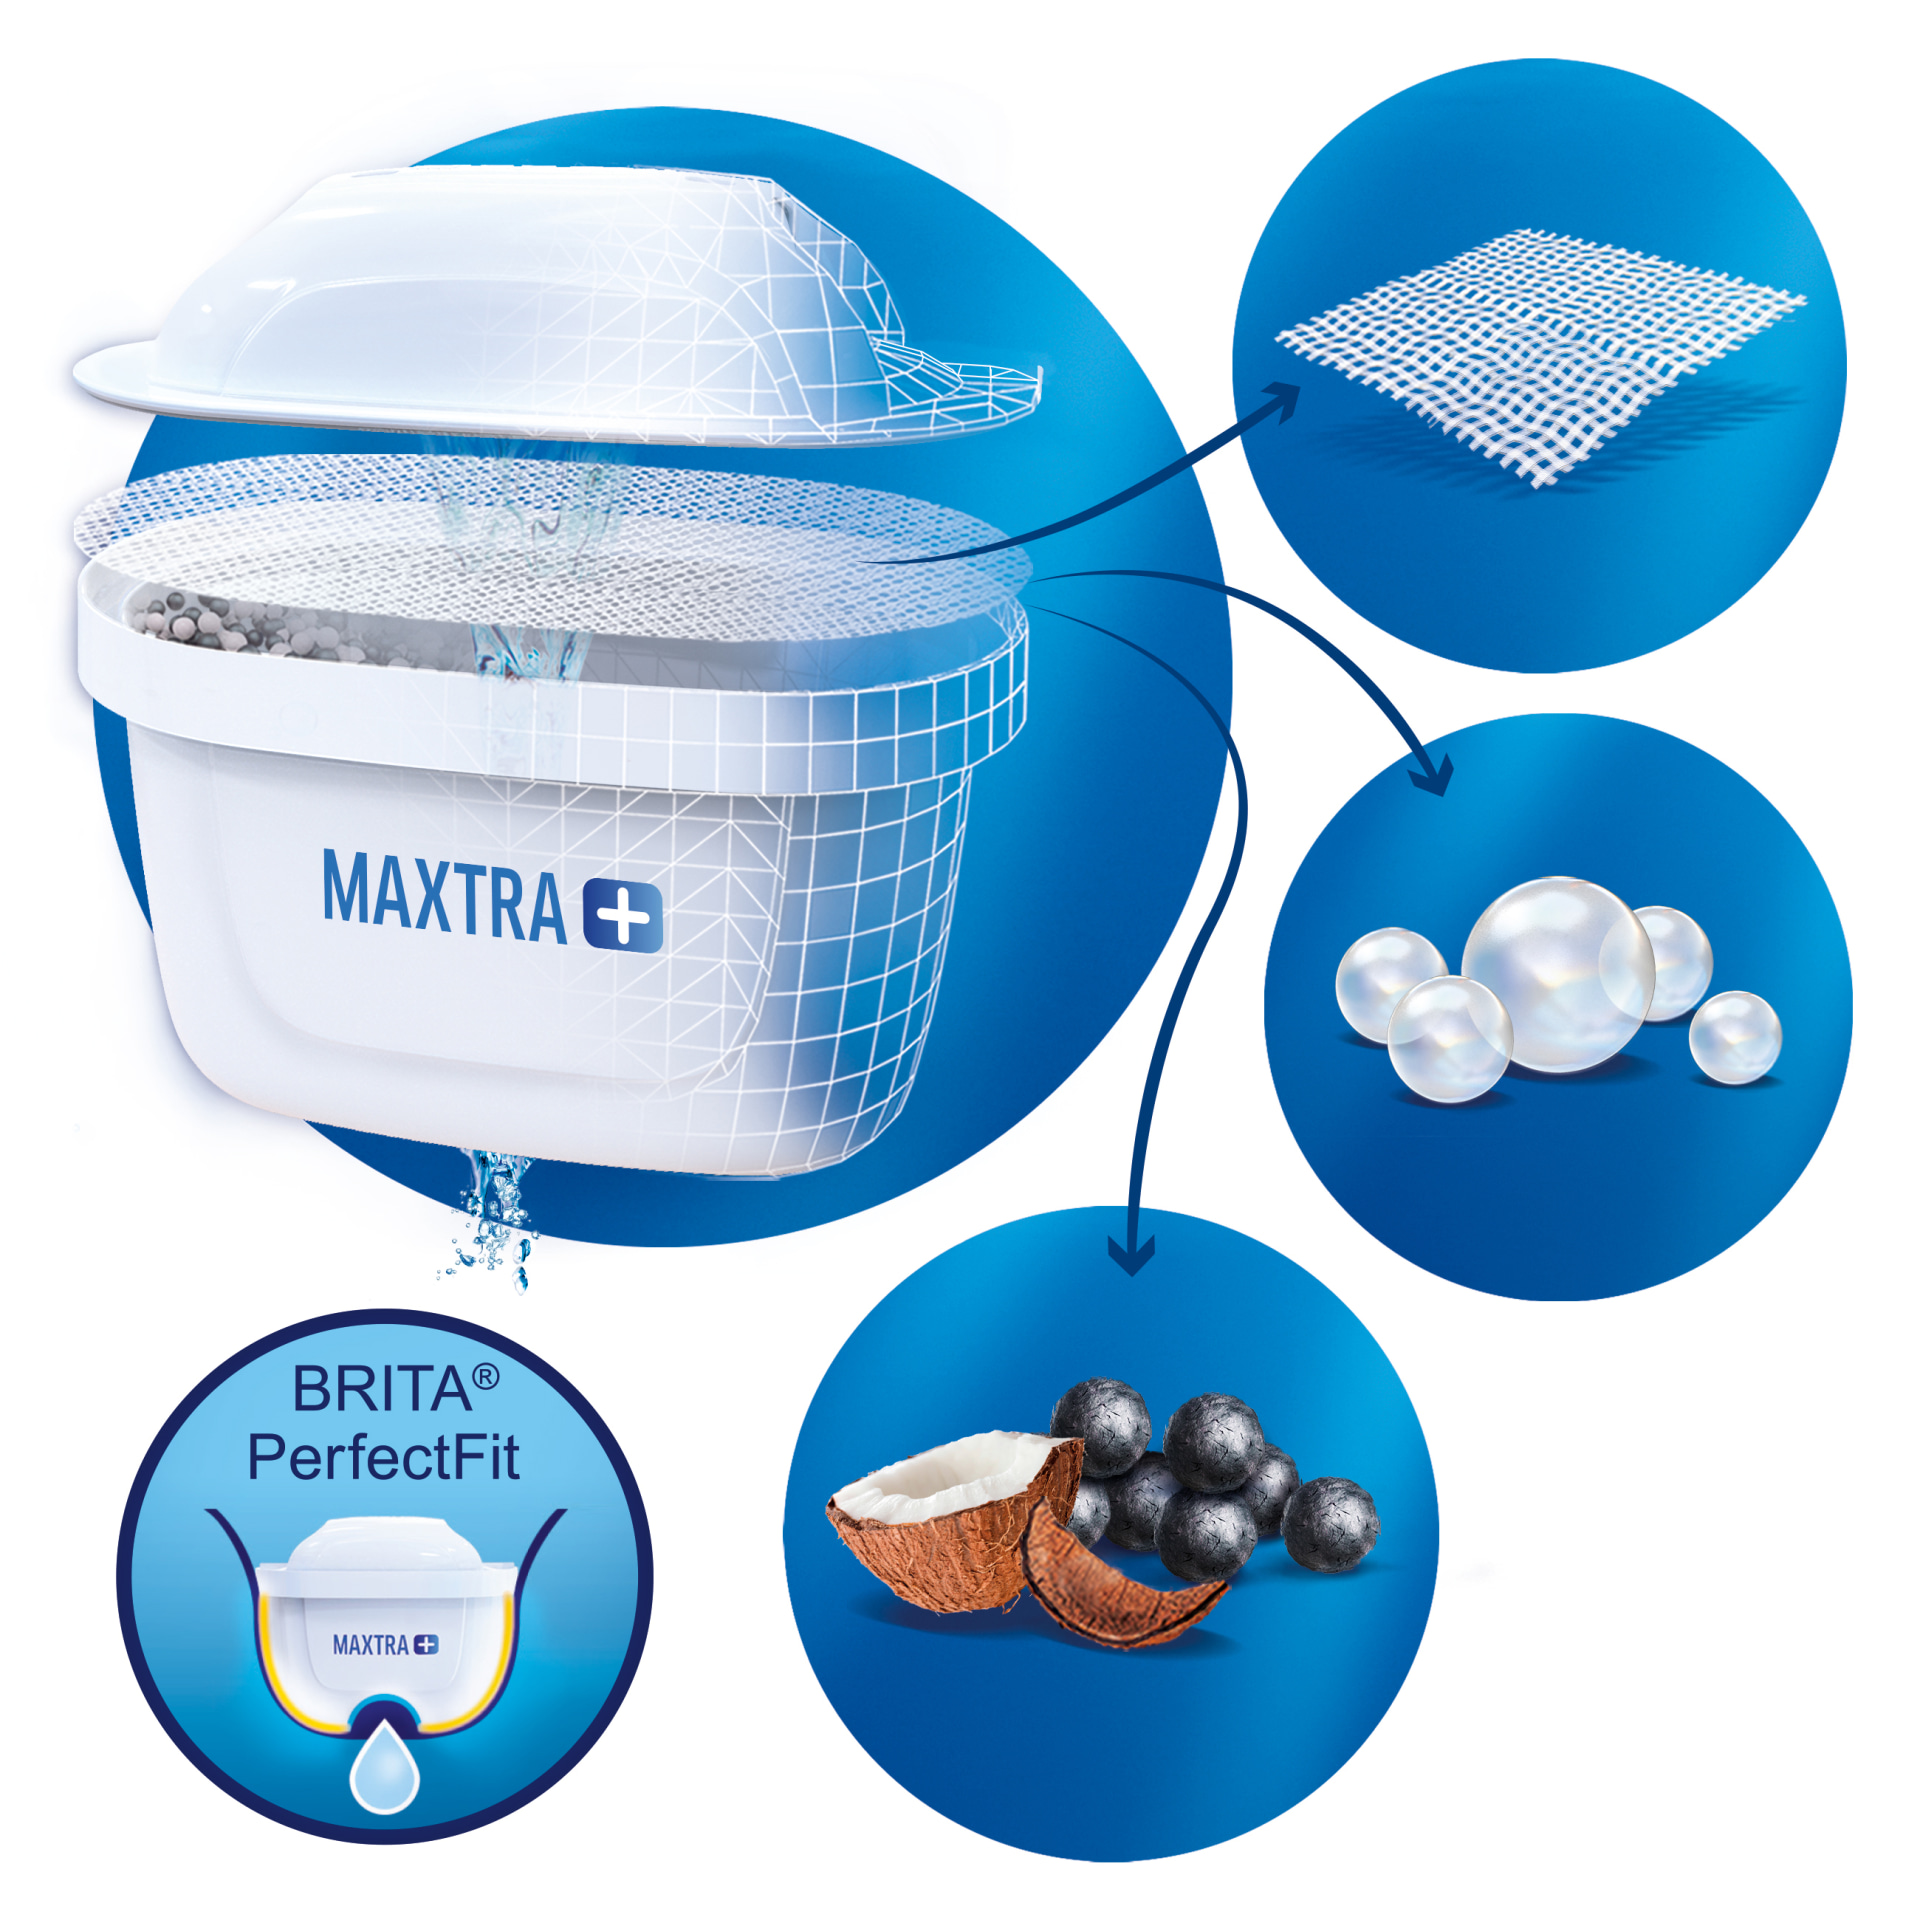 Compatible with Brita Maxtra filters - Water Filter for Maxtra